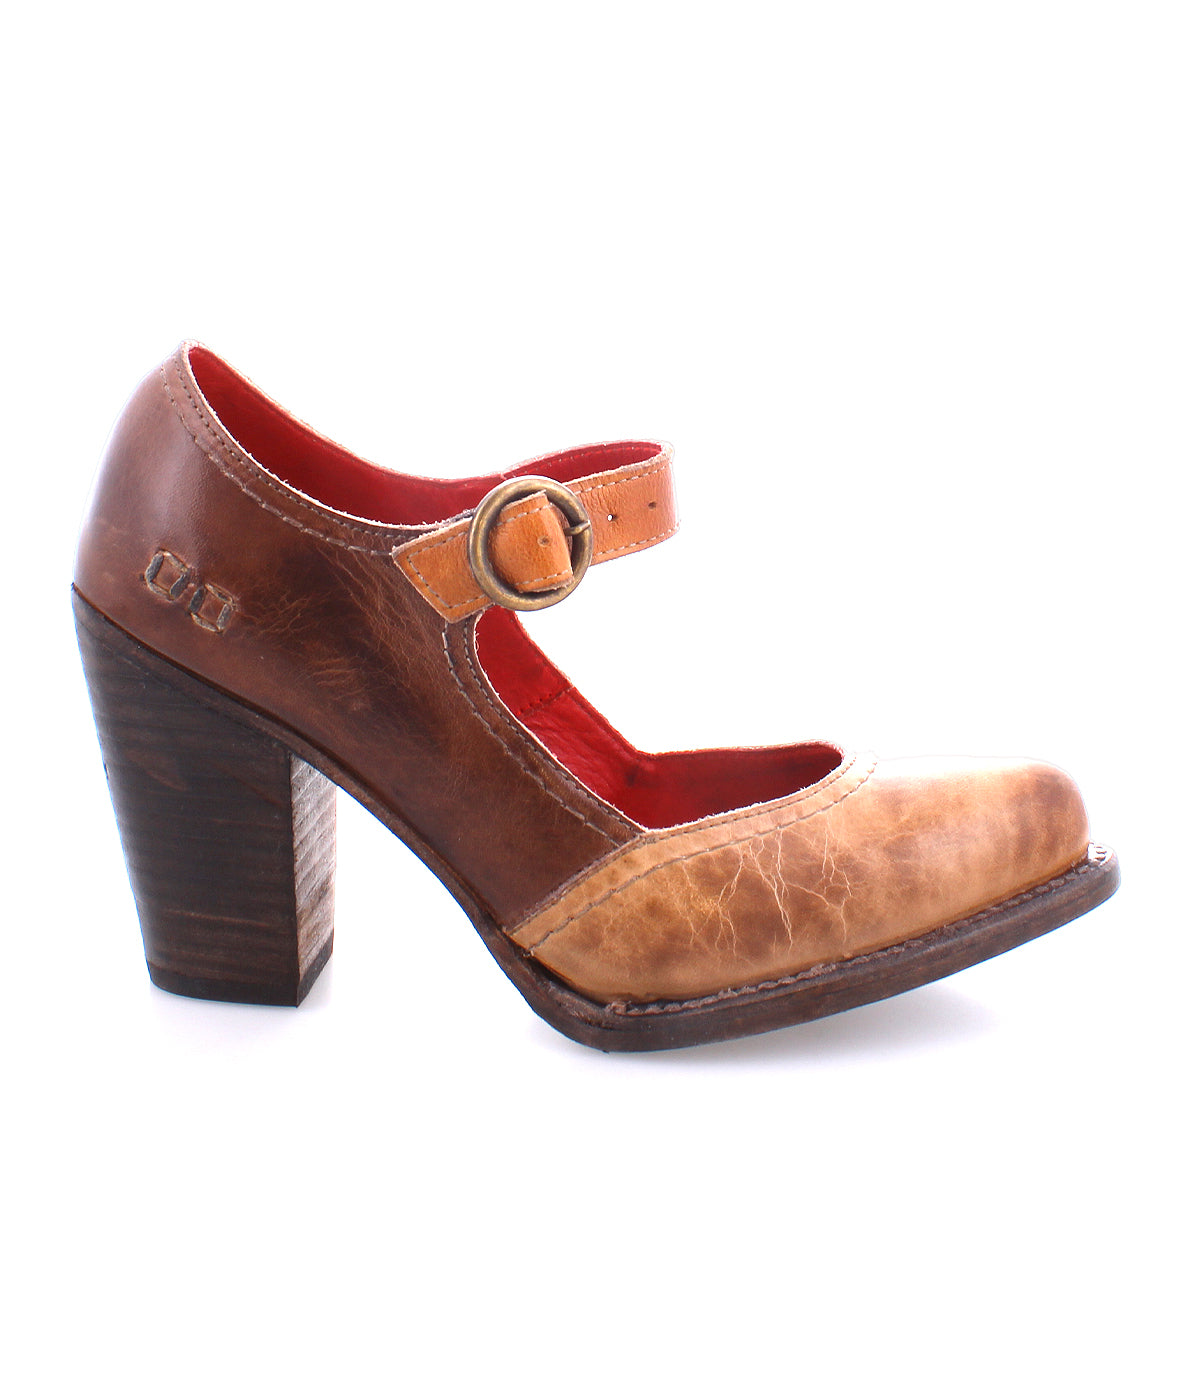 A single brown leather Ishtar mary jane pump by Bed Stu with a chunky block heel and an adjustable strap against a white background.